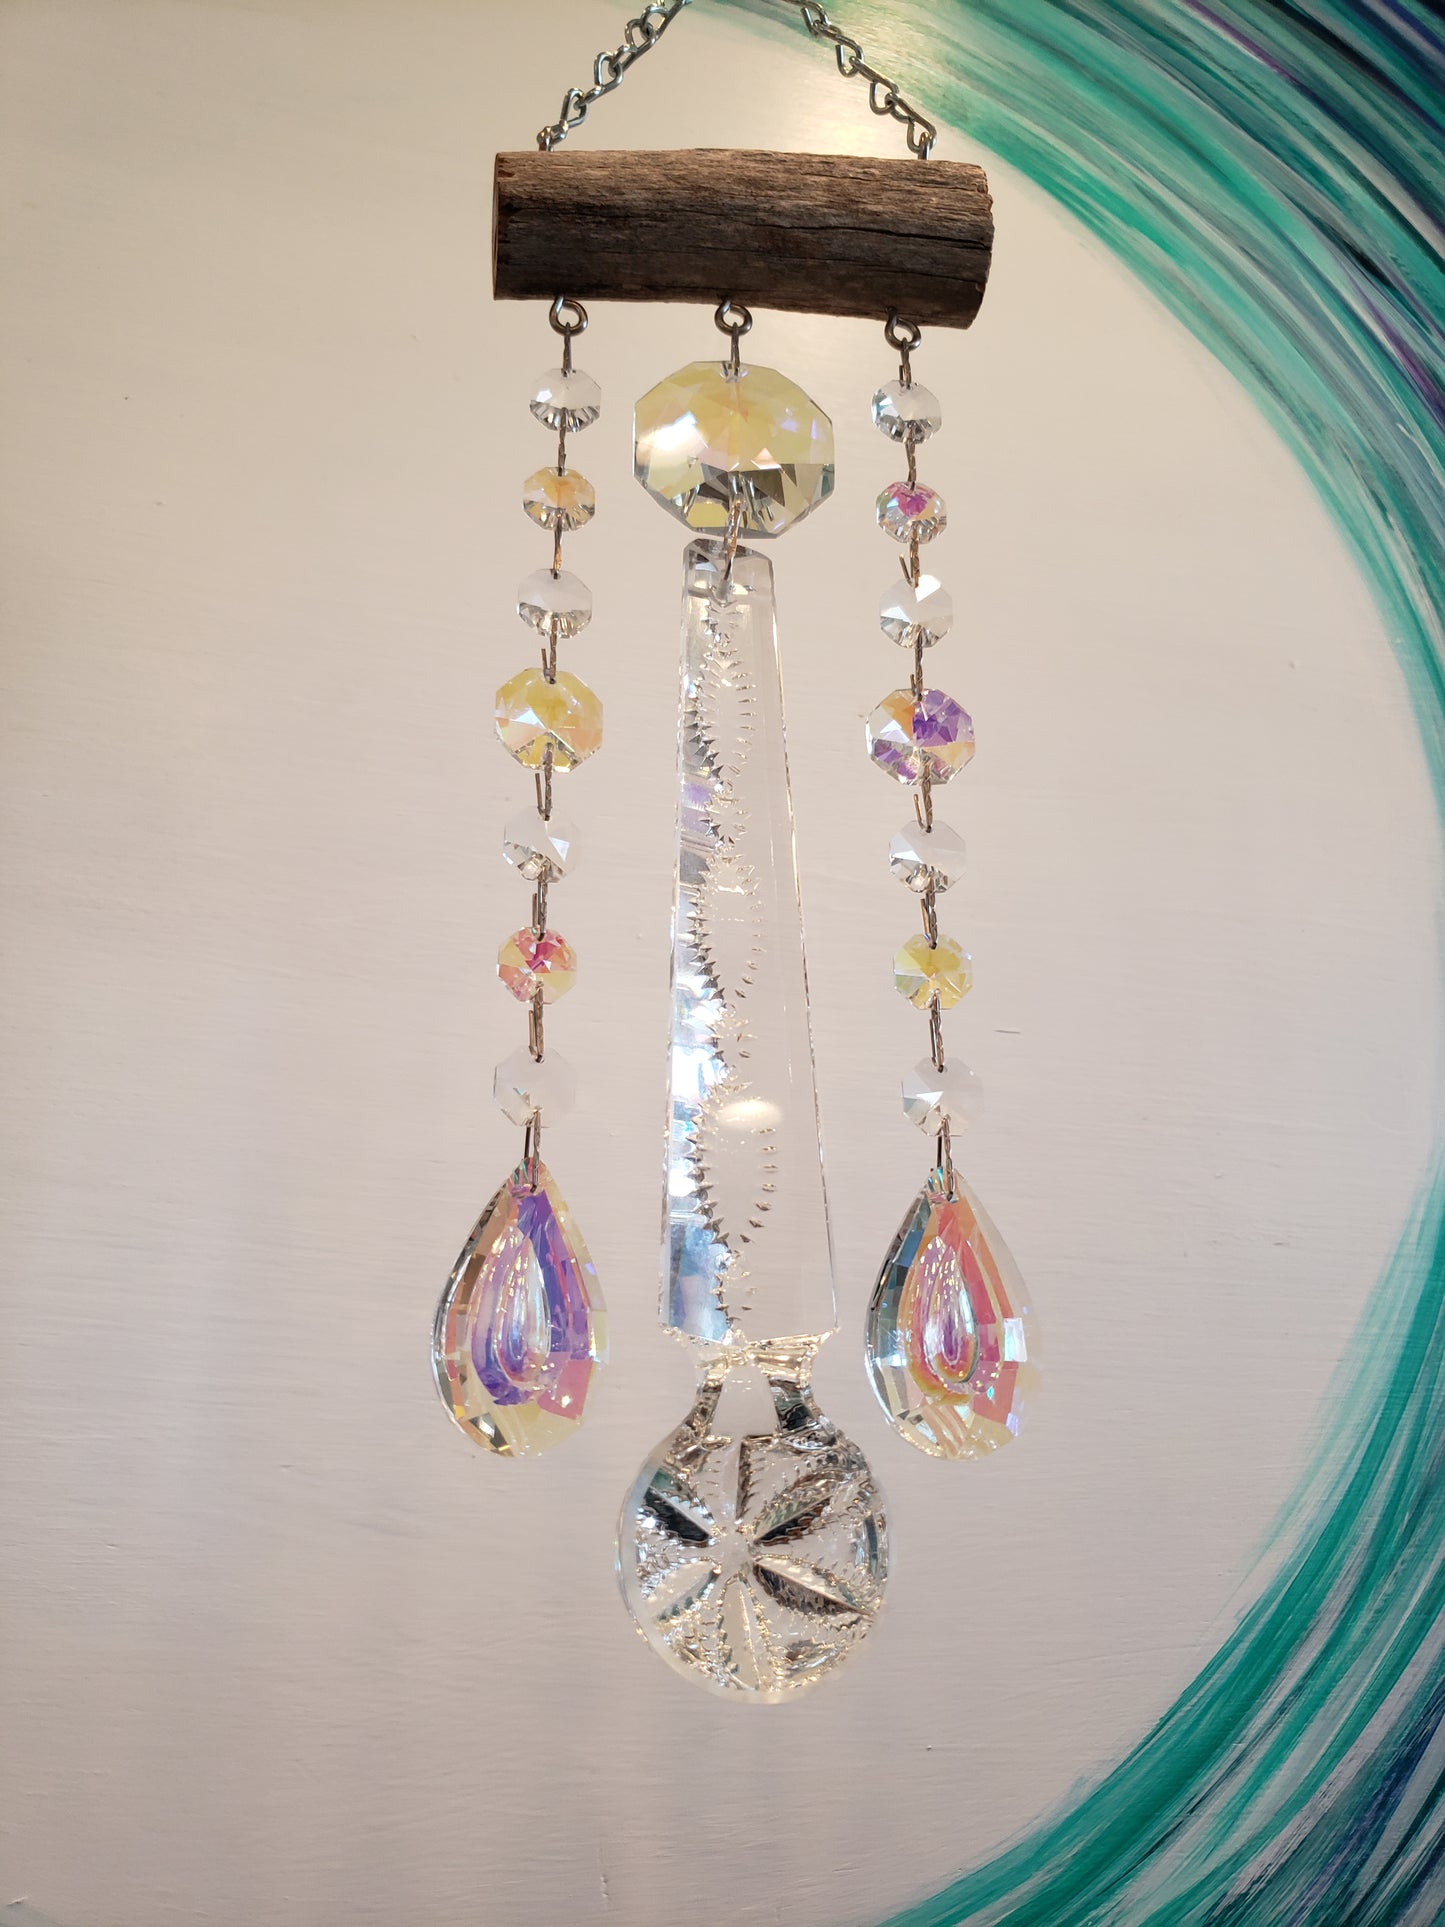 Unique handmade windchime gifts by Dazzling Drftwood